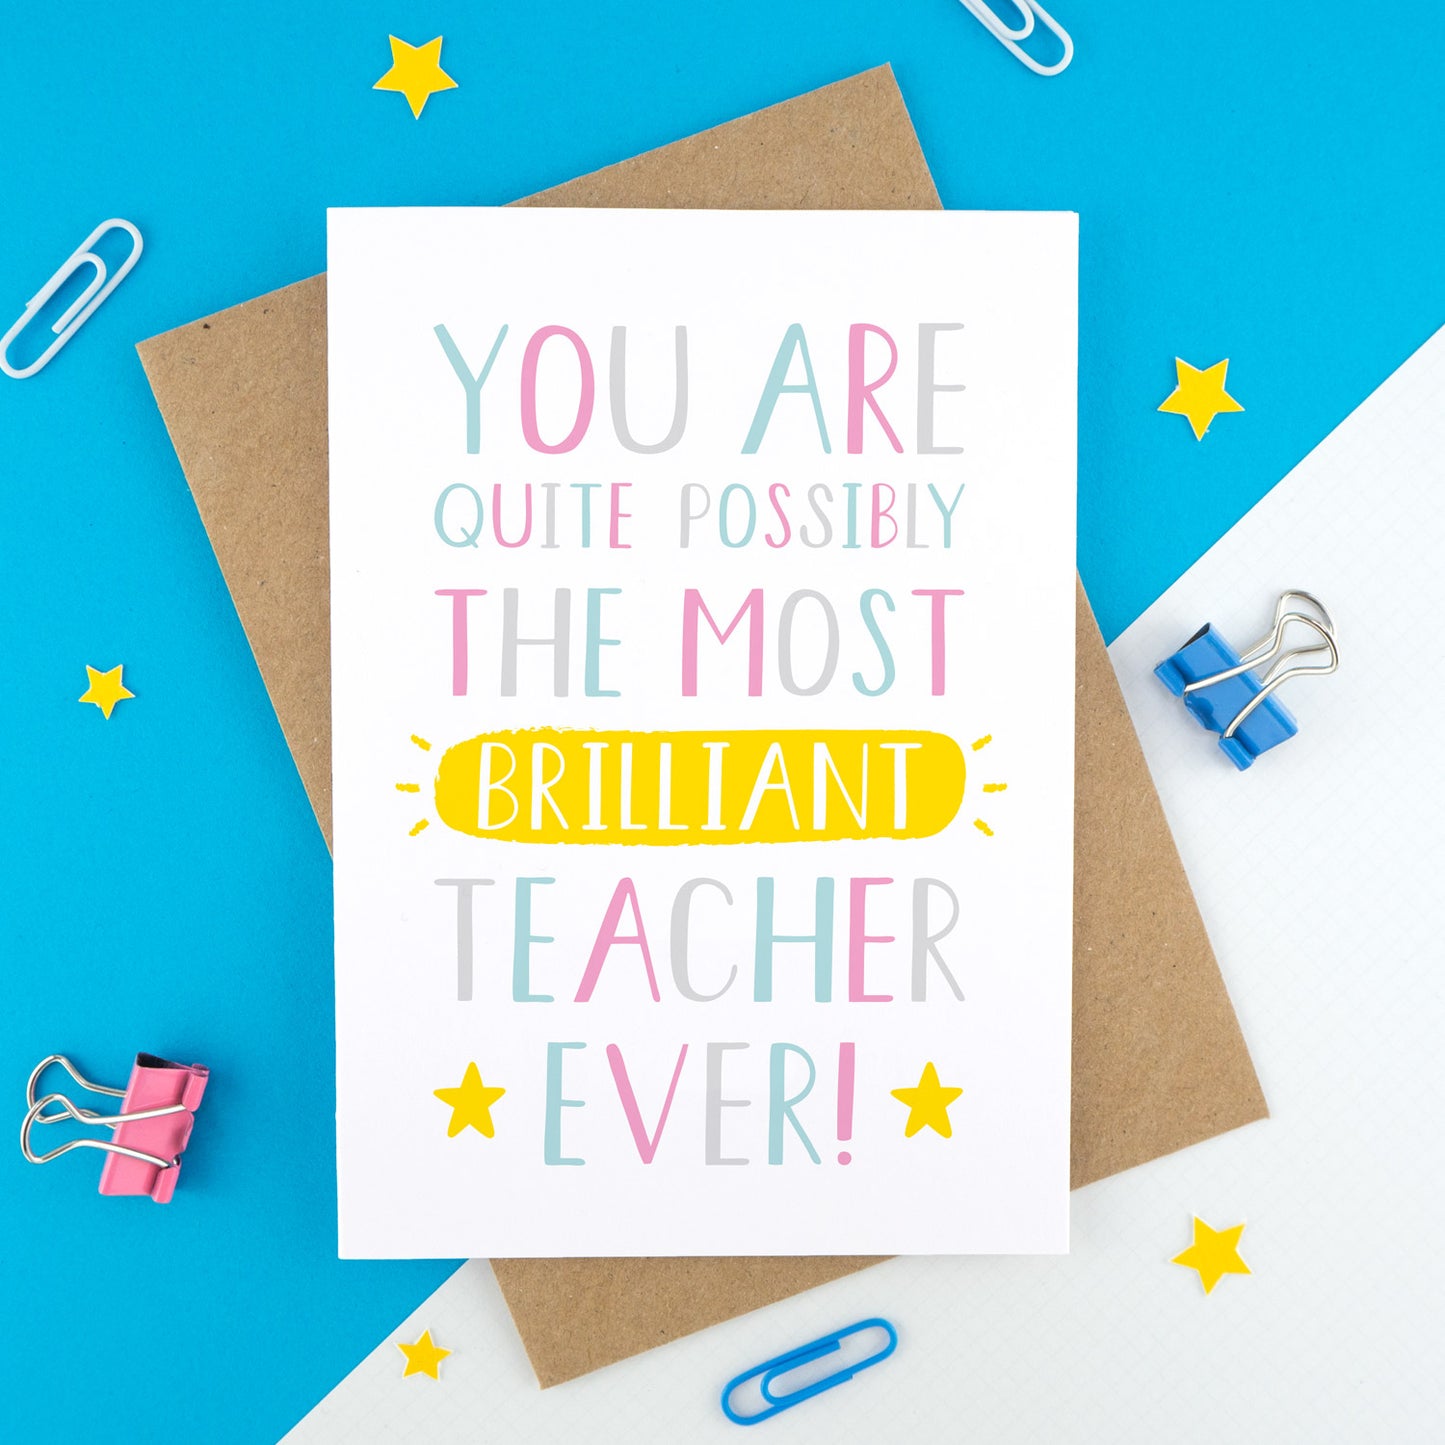 A thank you teacher card that reads "You are quite possibly the most brilliant teacher ever!" with pink, blue and grey typography with a burst of yellow!